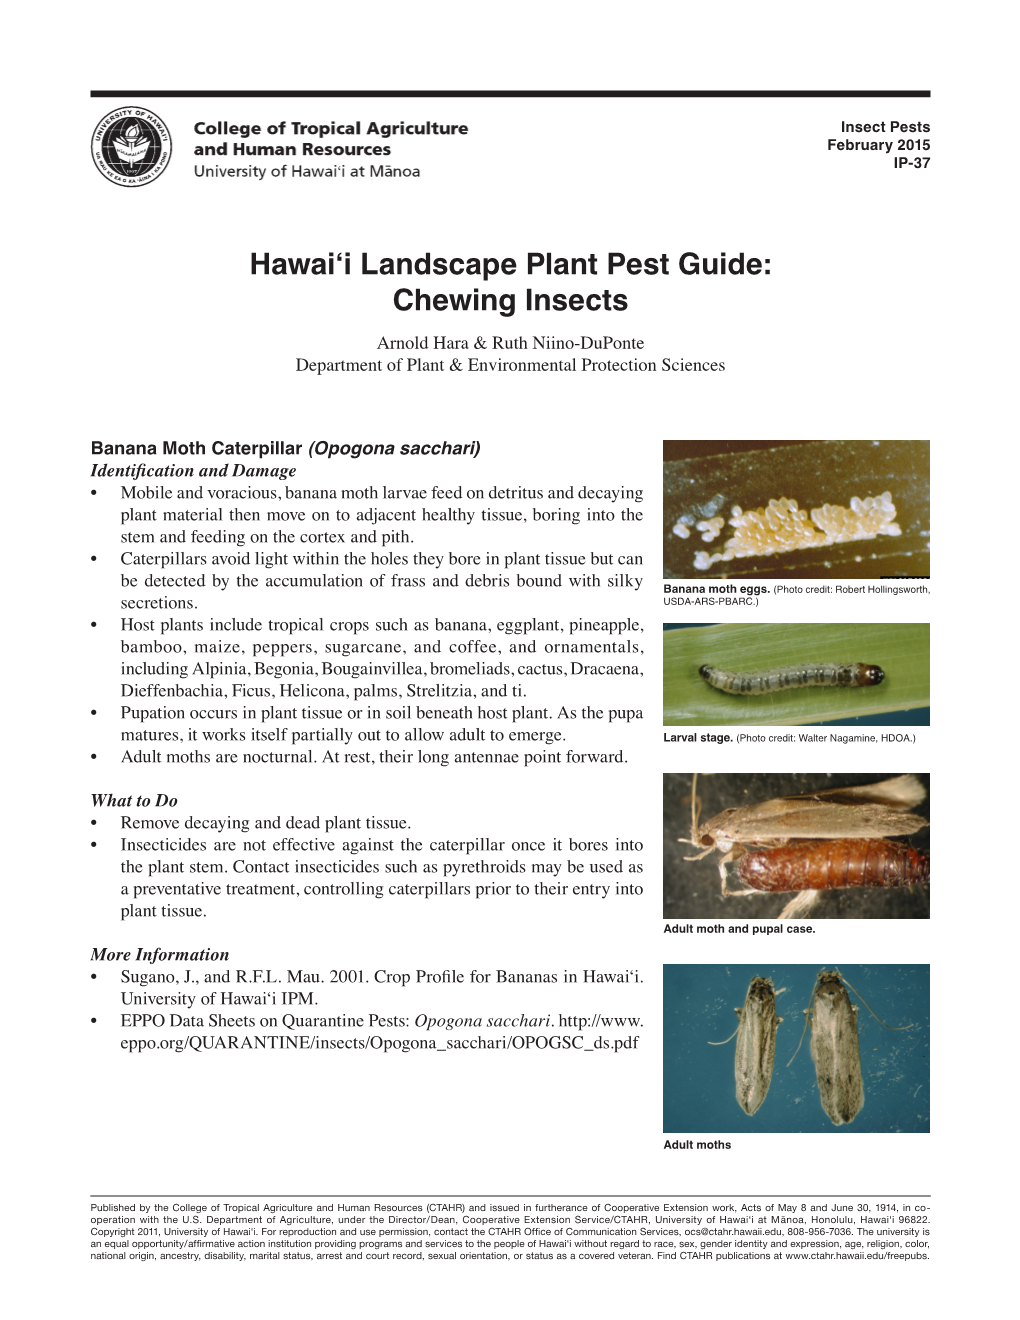 Hawai'i Landscape Plant Pest Guide: Chewing Insects